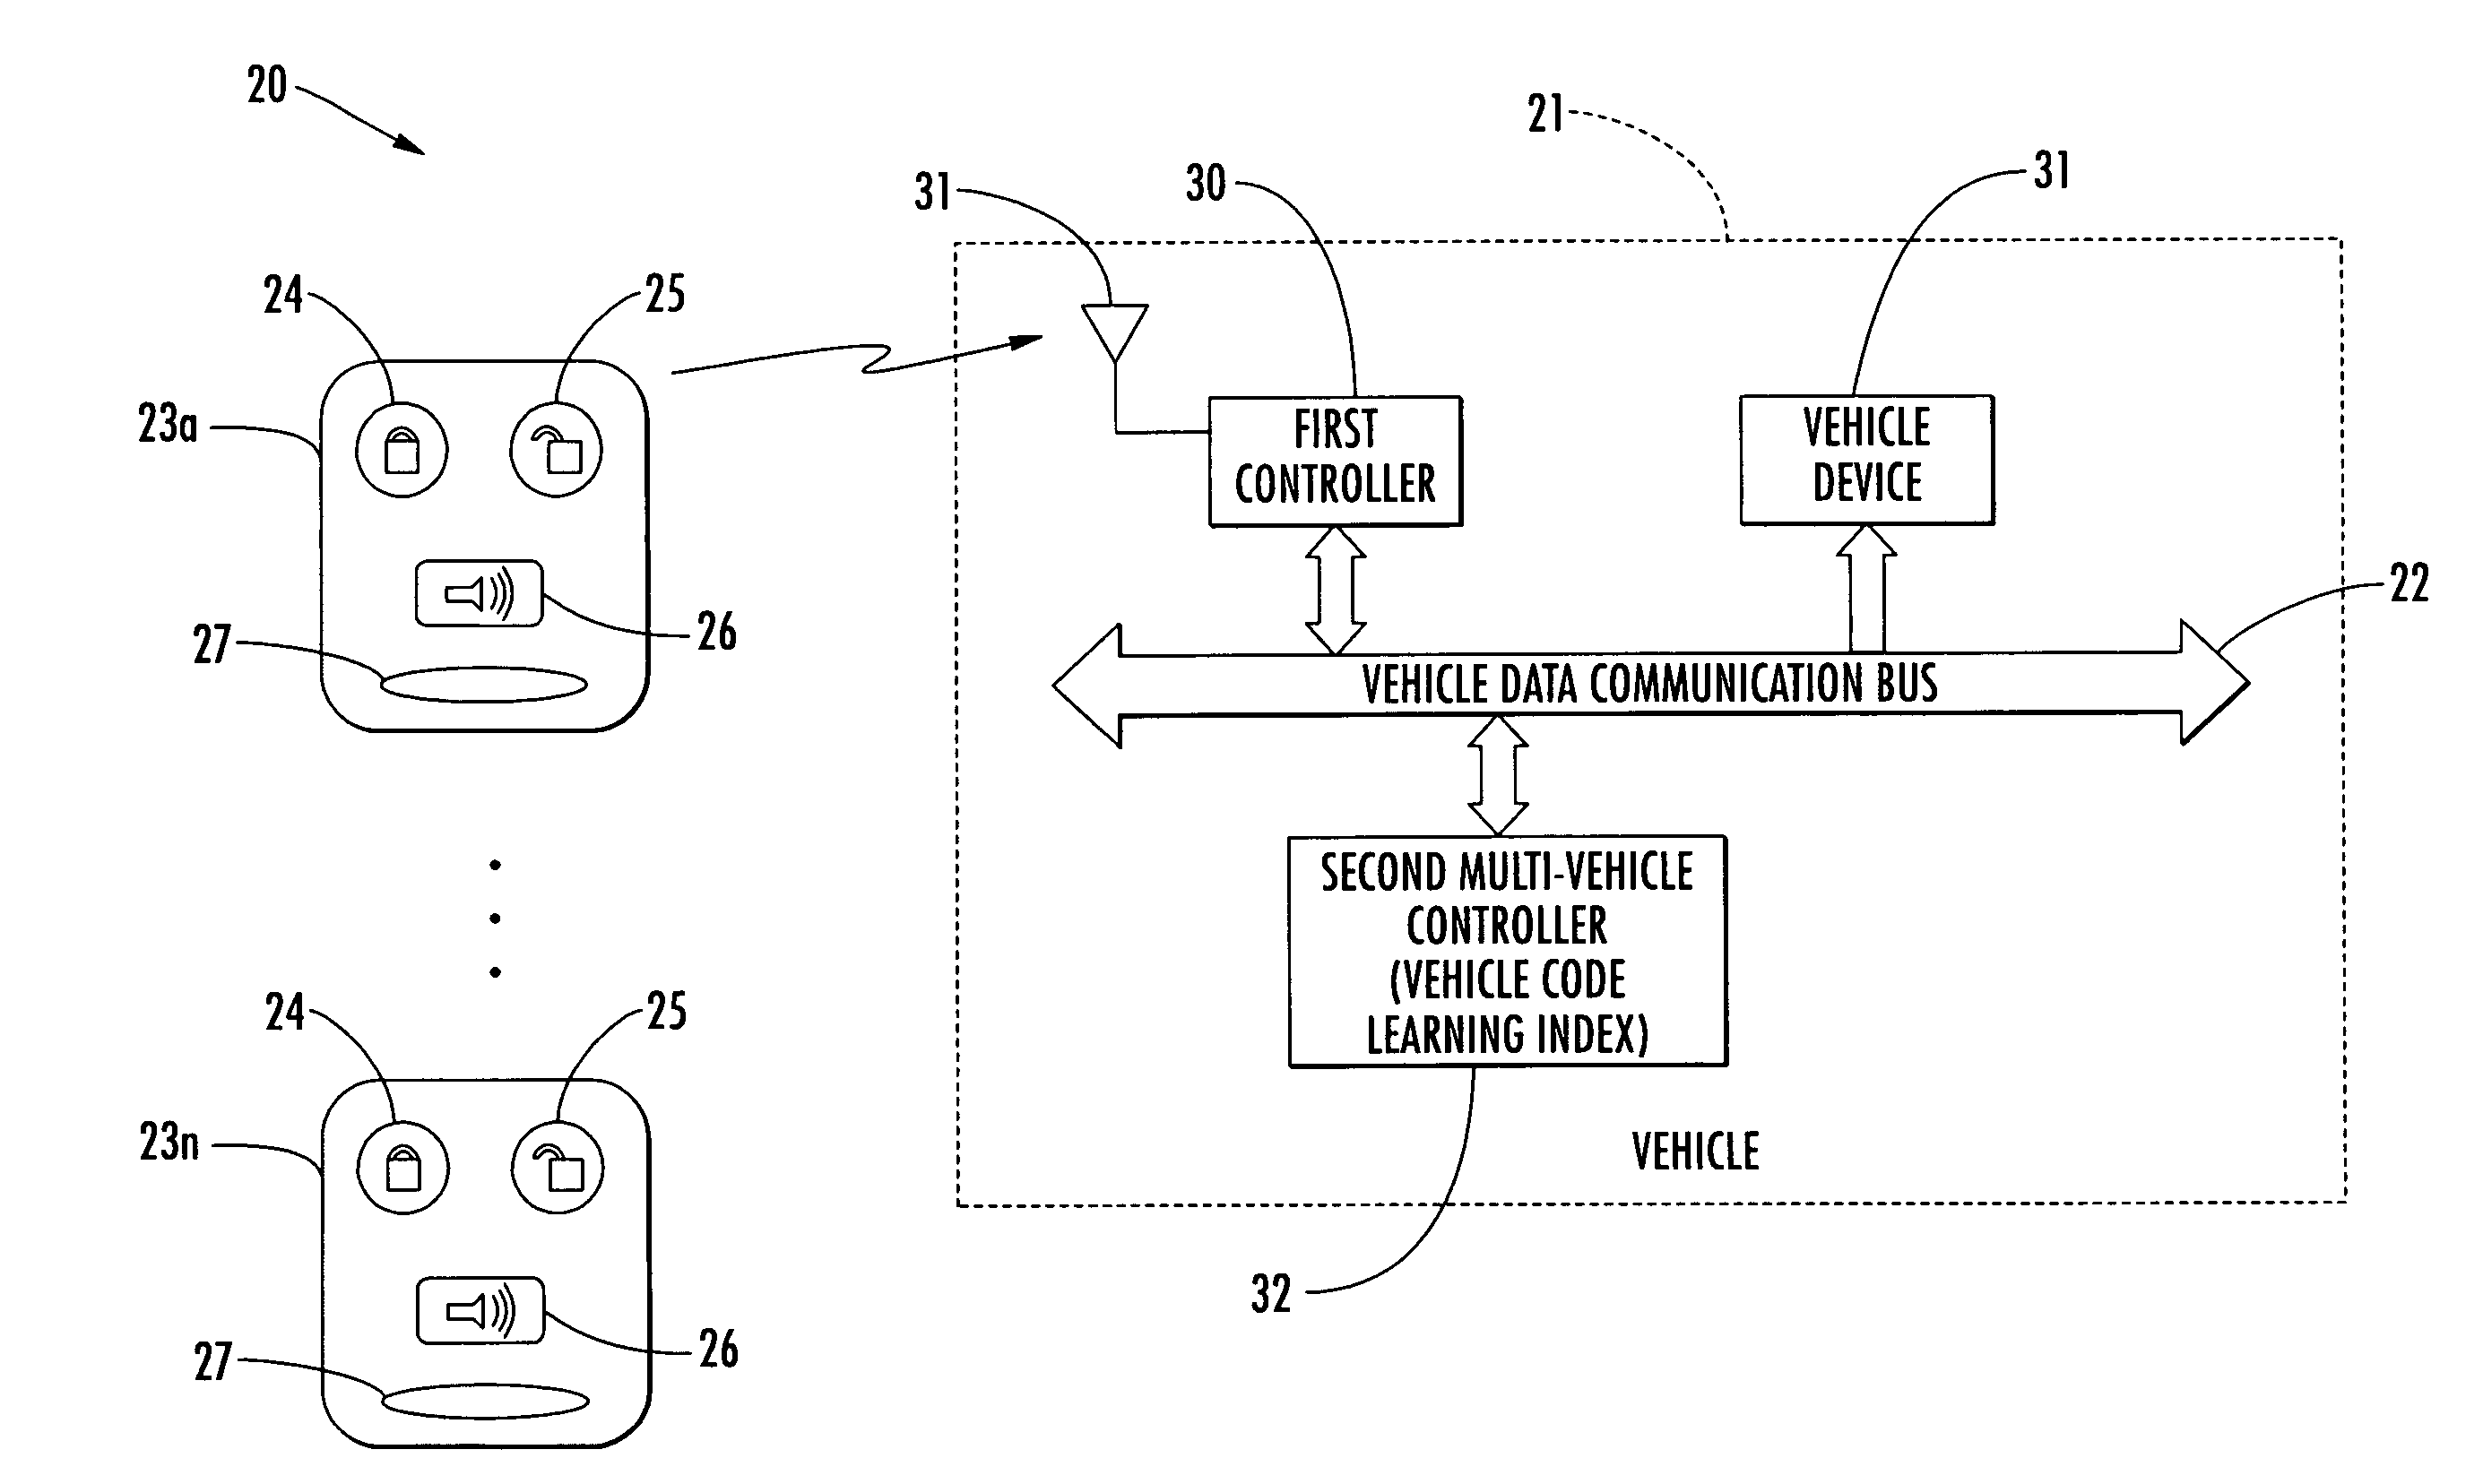 Vehicle control system including multi-vehicle controller using vehicle code learning index and related methods